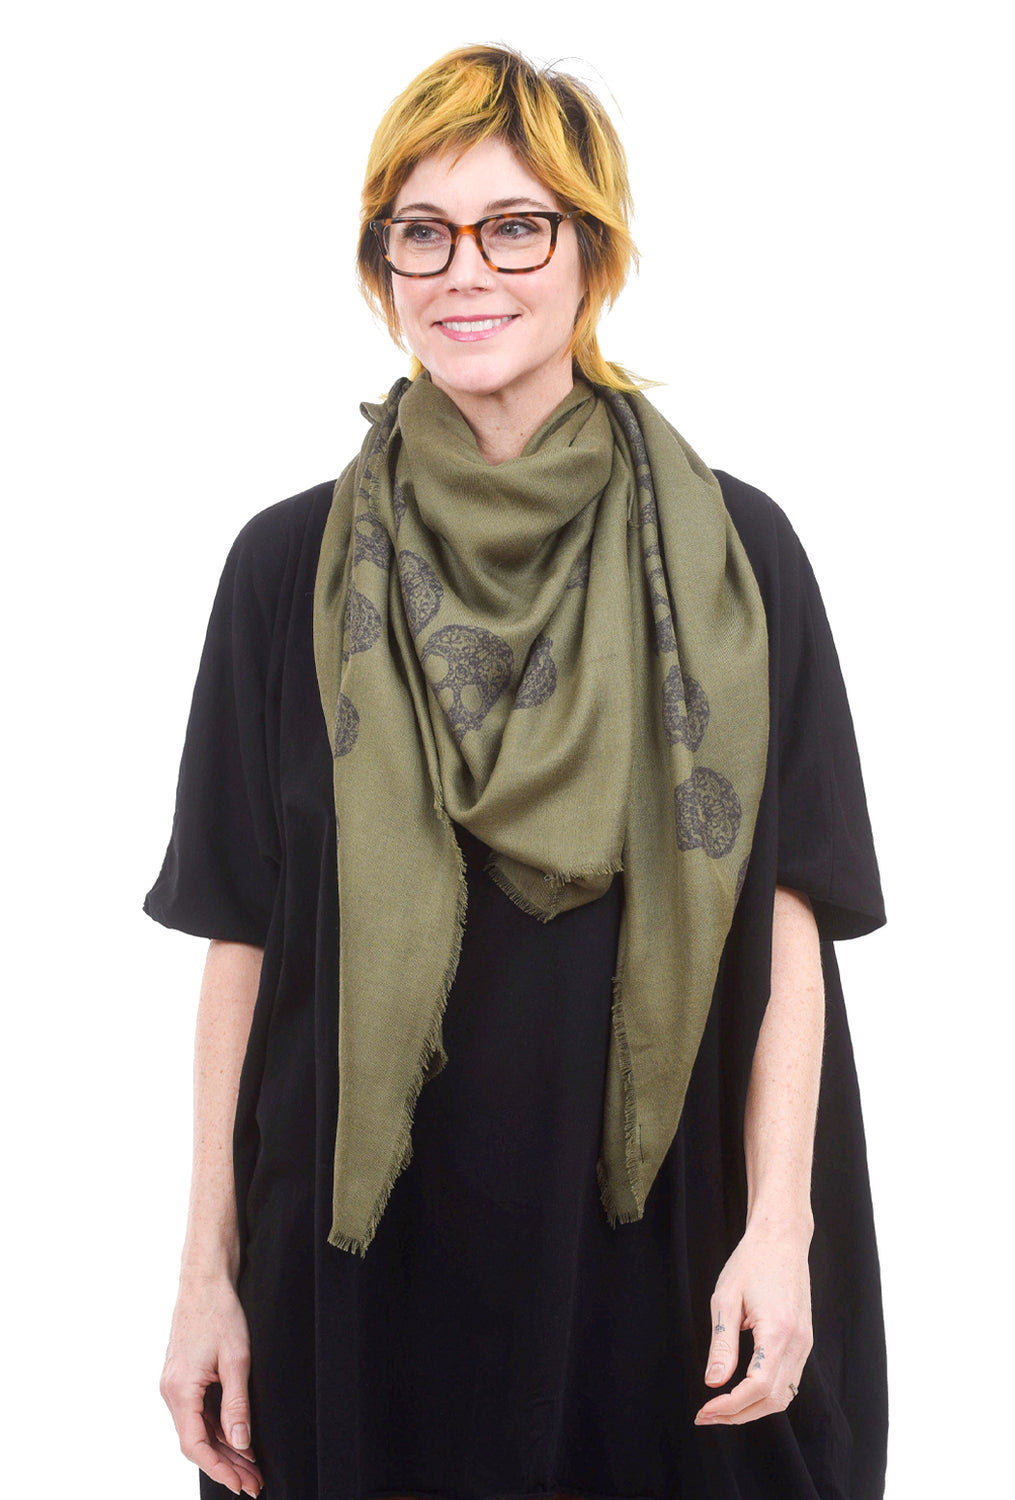 Blue Pacific Frida Skull Scarf, Olive One Size Olive